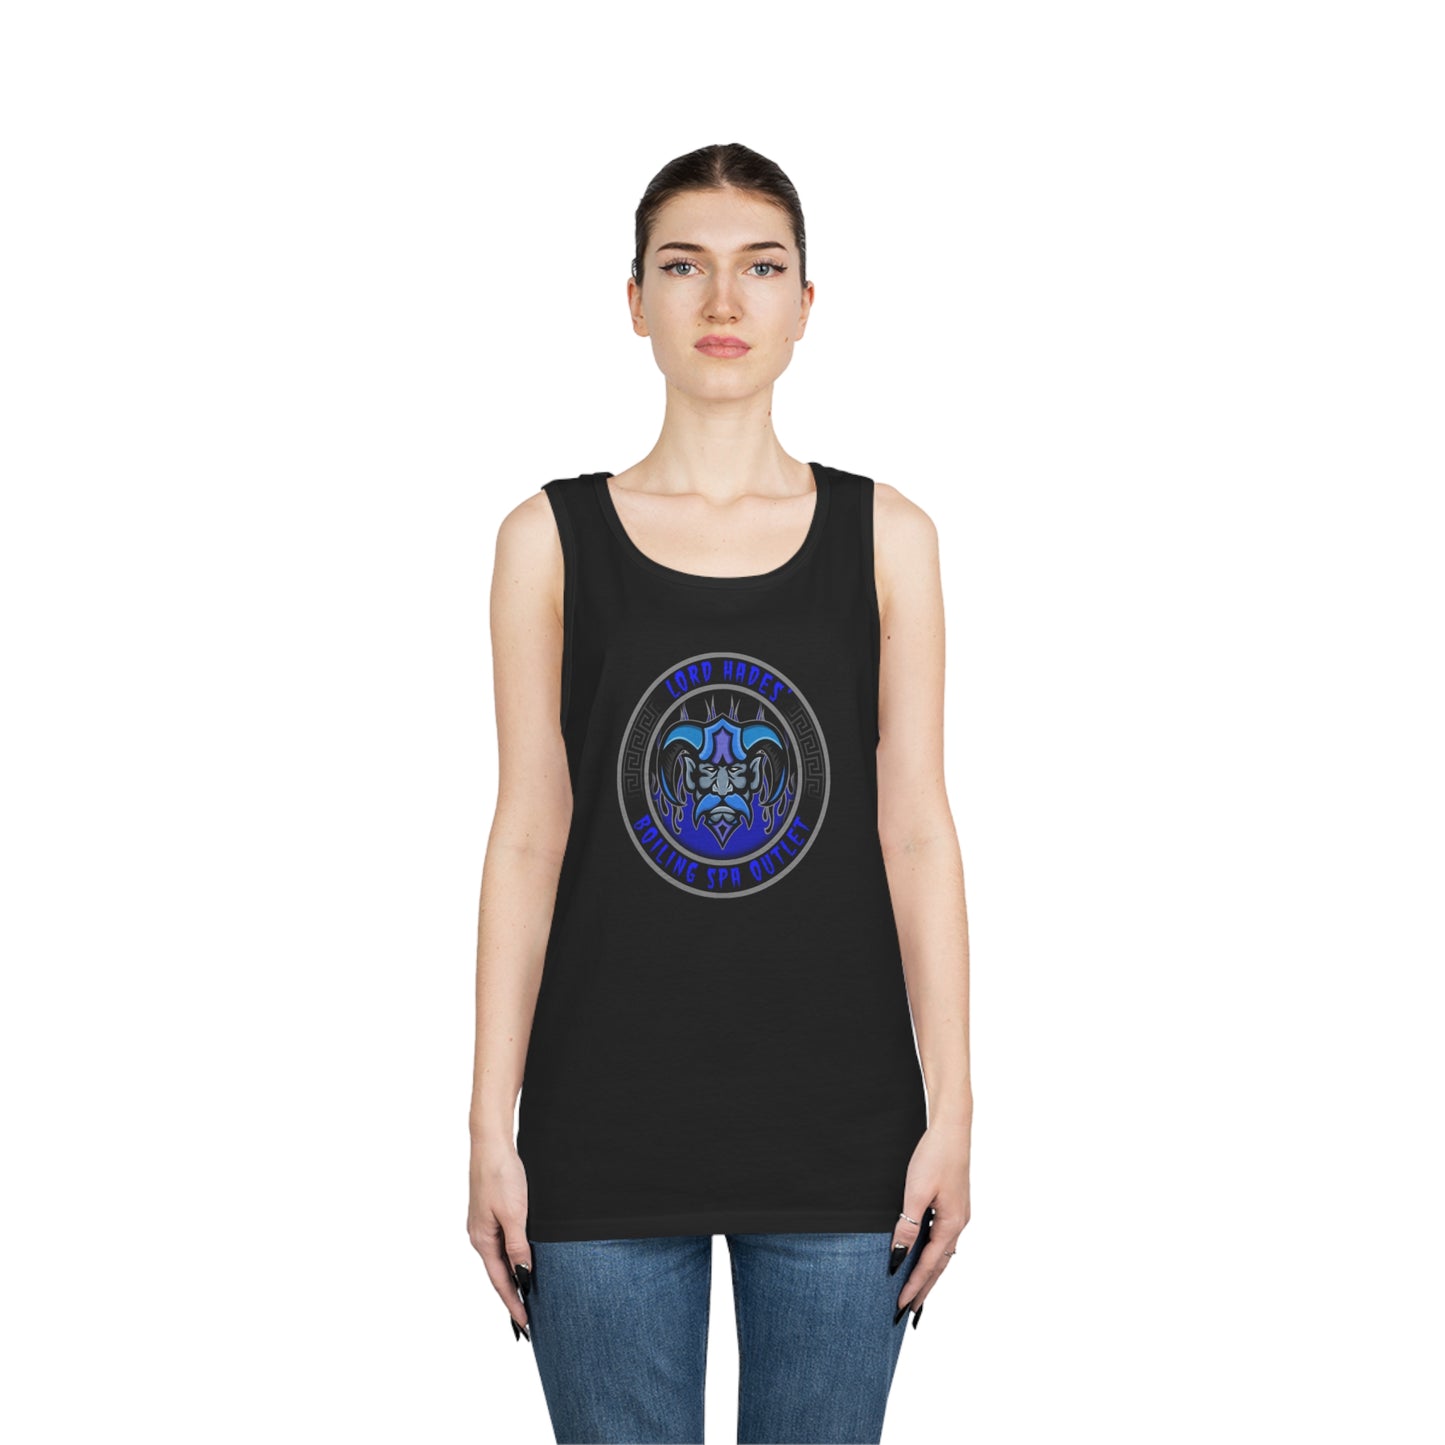 LORD HADES - BOILING SPA OUTLET Unisex Heavy Cotton Tank Top